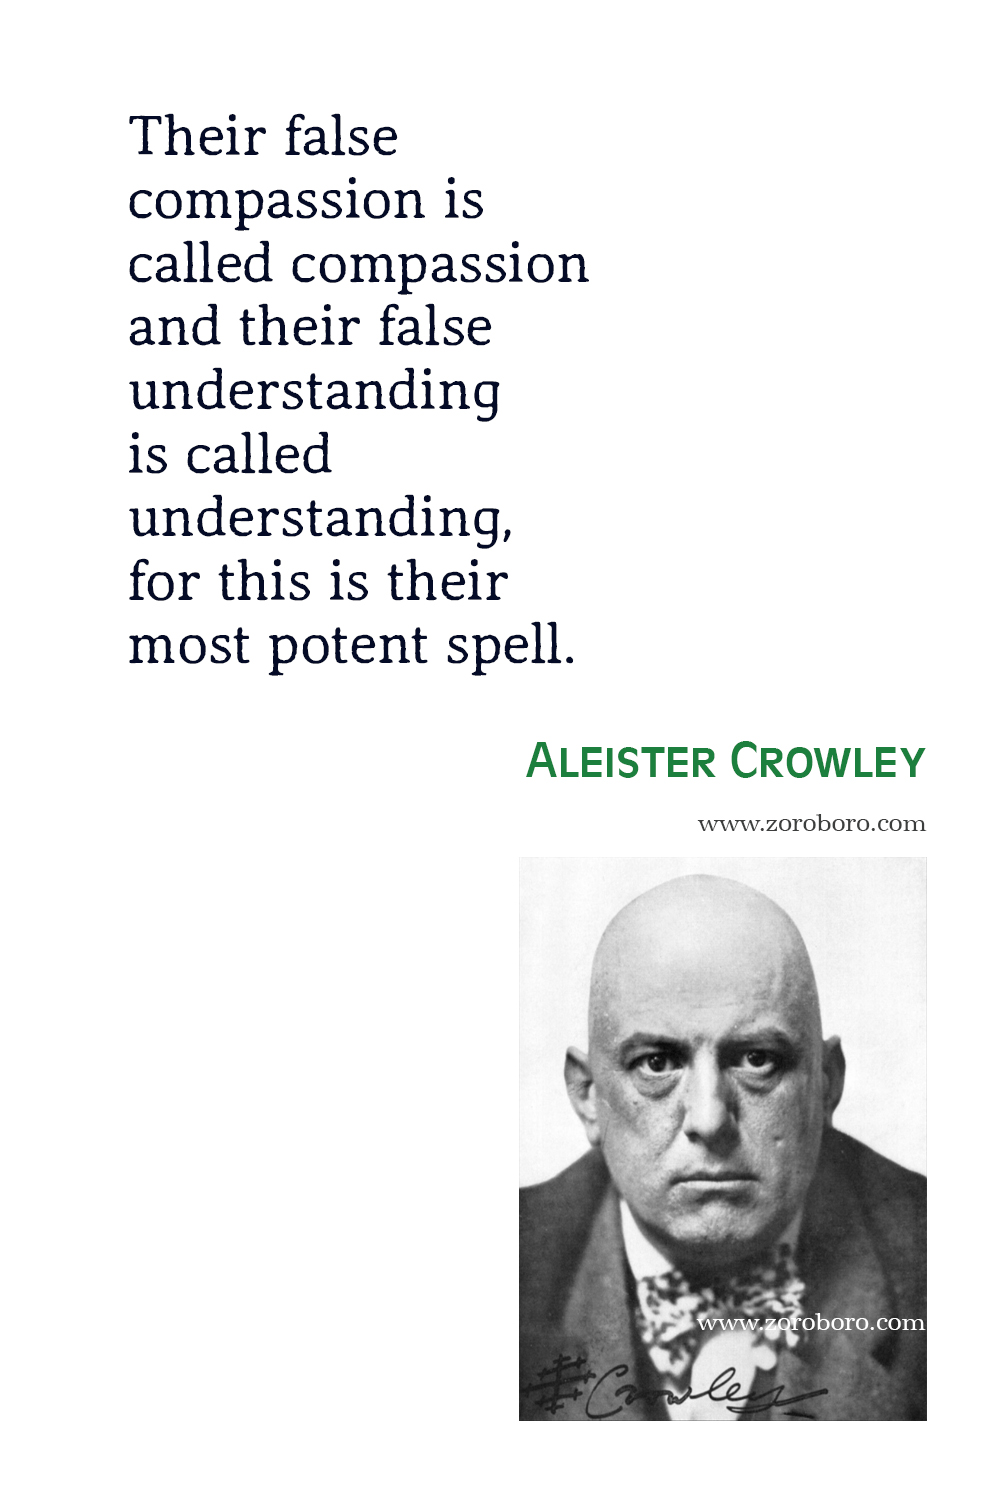 Aleister Crowley Quotes, Aleister Crowley Poet, Aleister Crowley Poetry, Aleister Crowley Poems, Aleister Crowley Books Quotes, Aleister Crowley Writings. Diary of a Drug Fiend, The Book of the Law, The Book of Lies & Moonchild (novel).